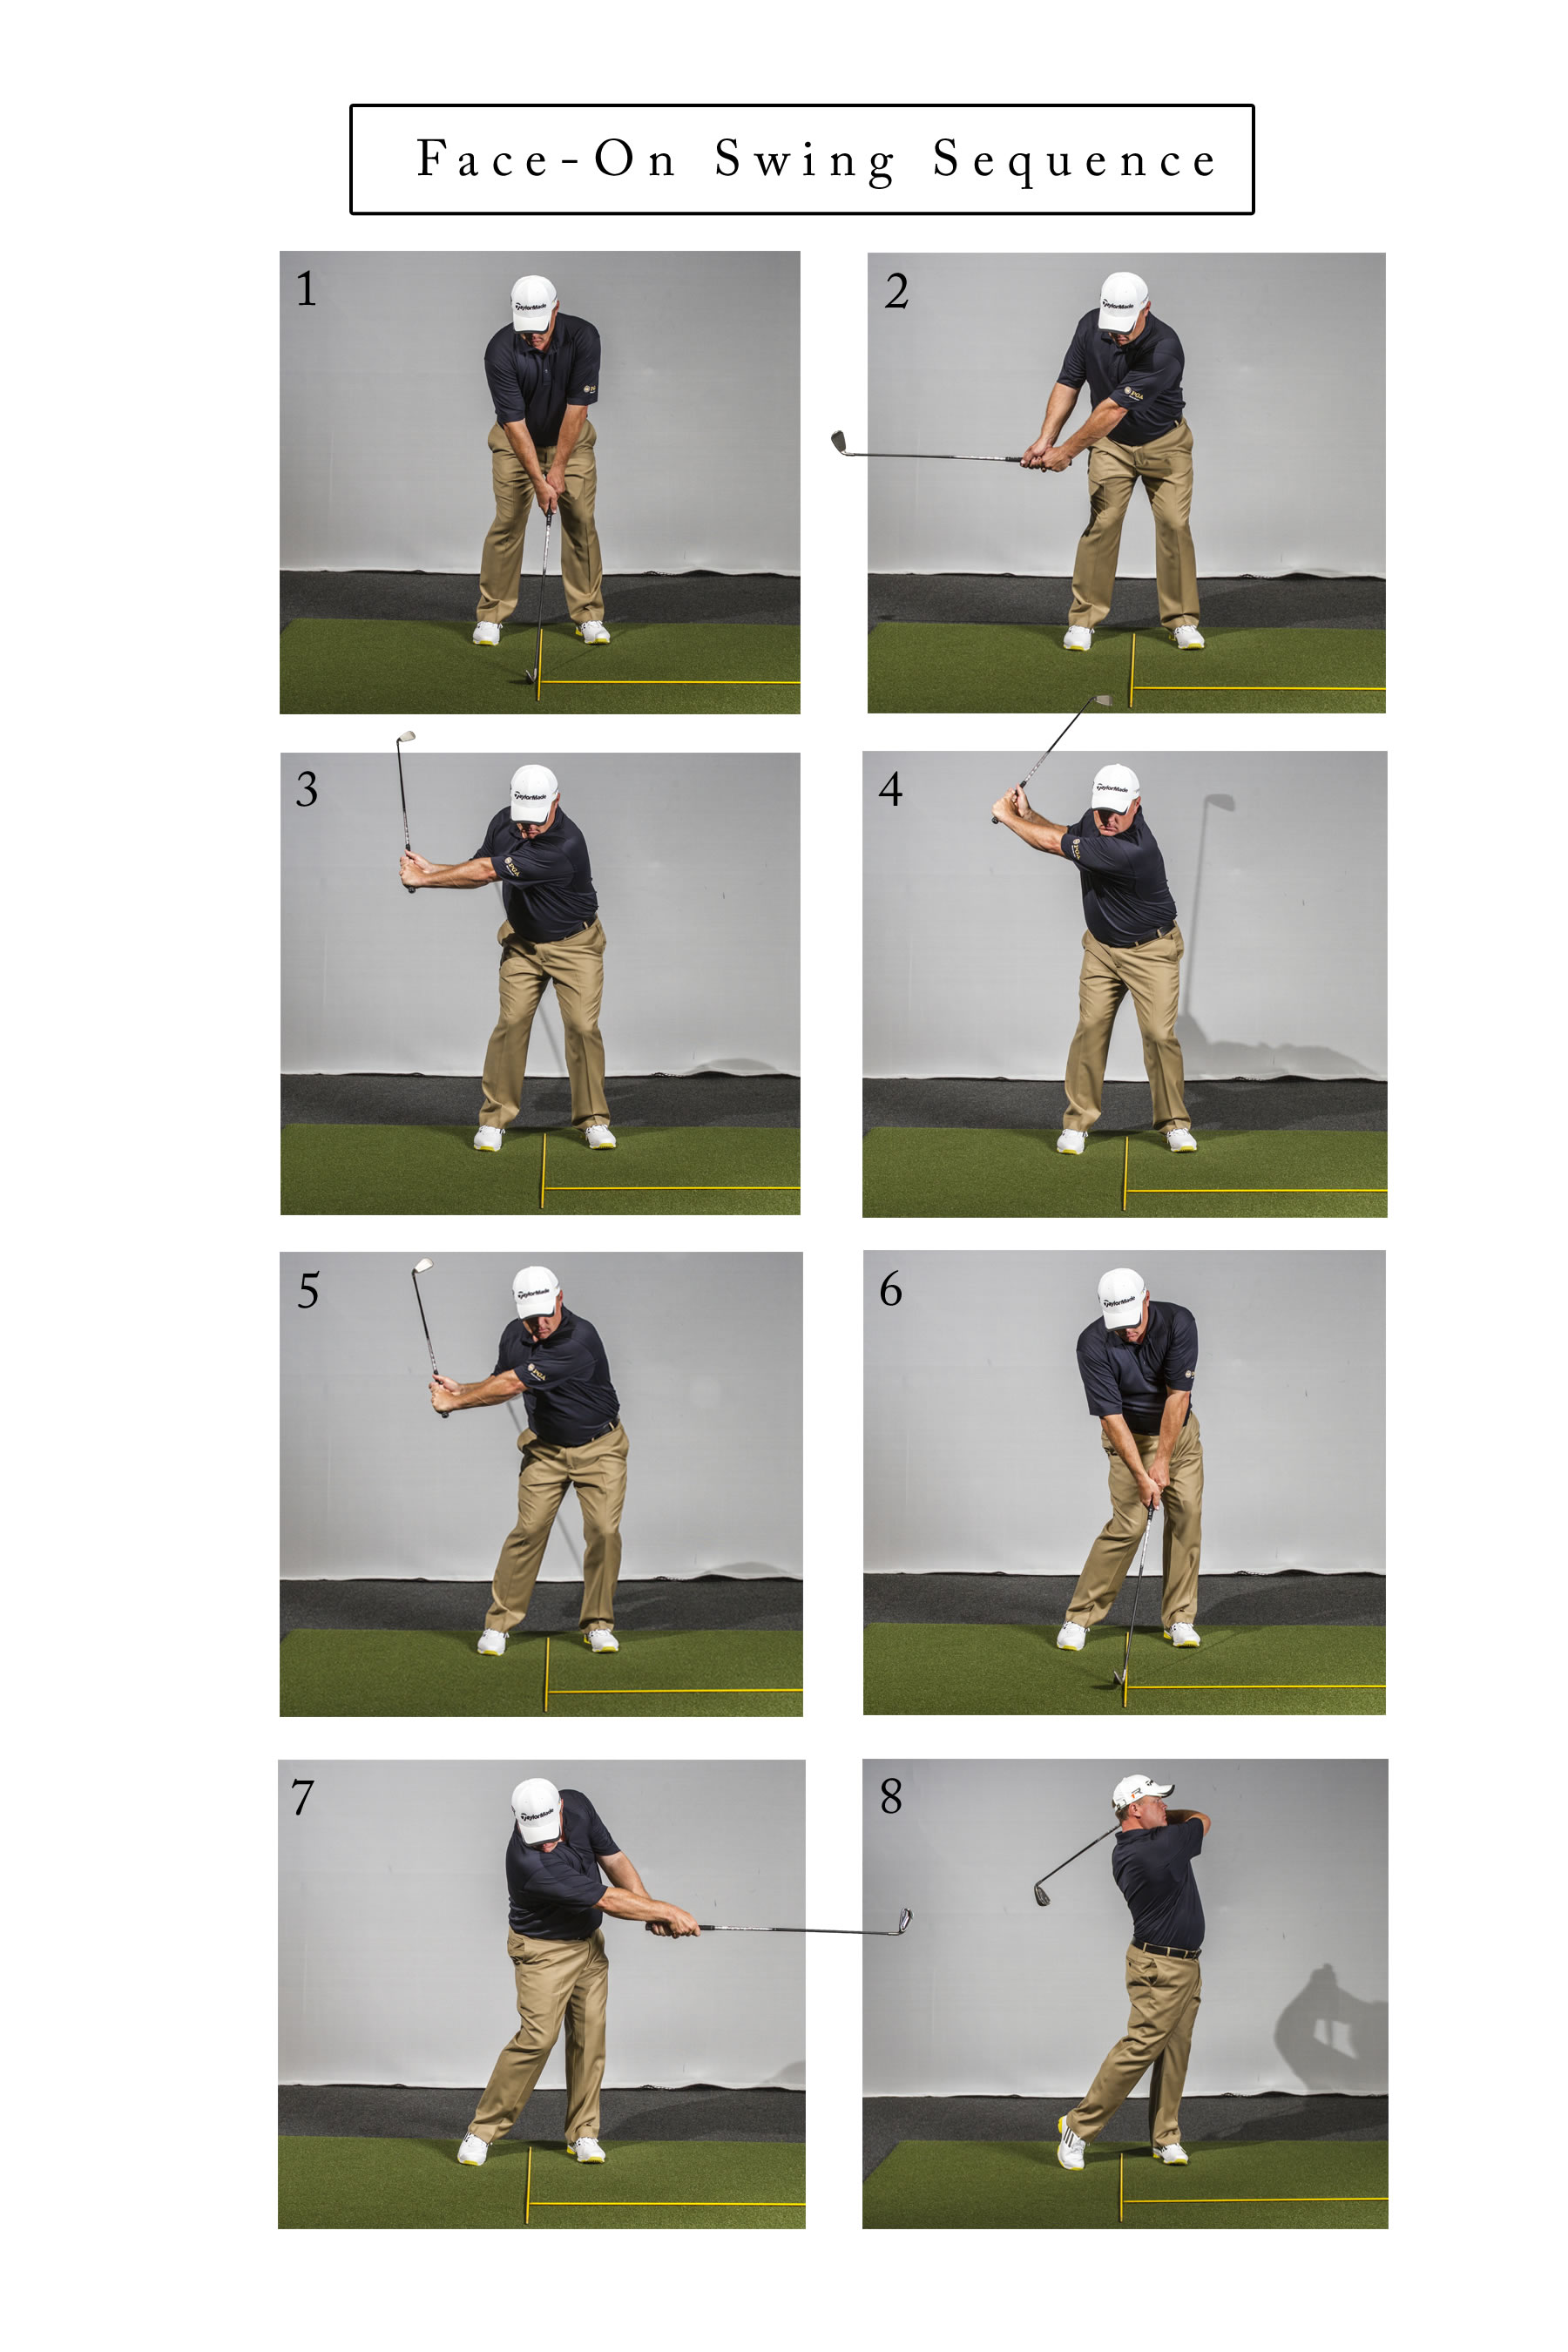 Learn to play better golf at Chicago Indoor Golf Training Facility